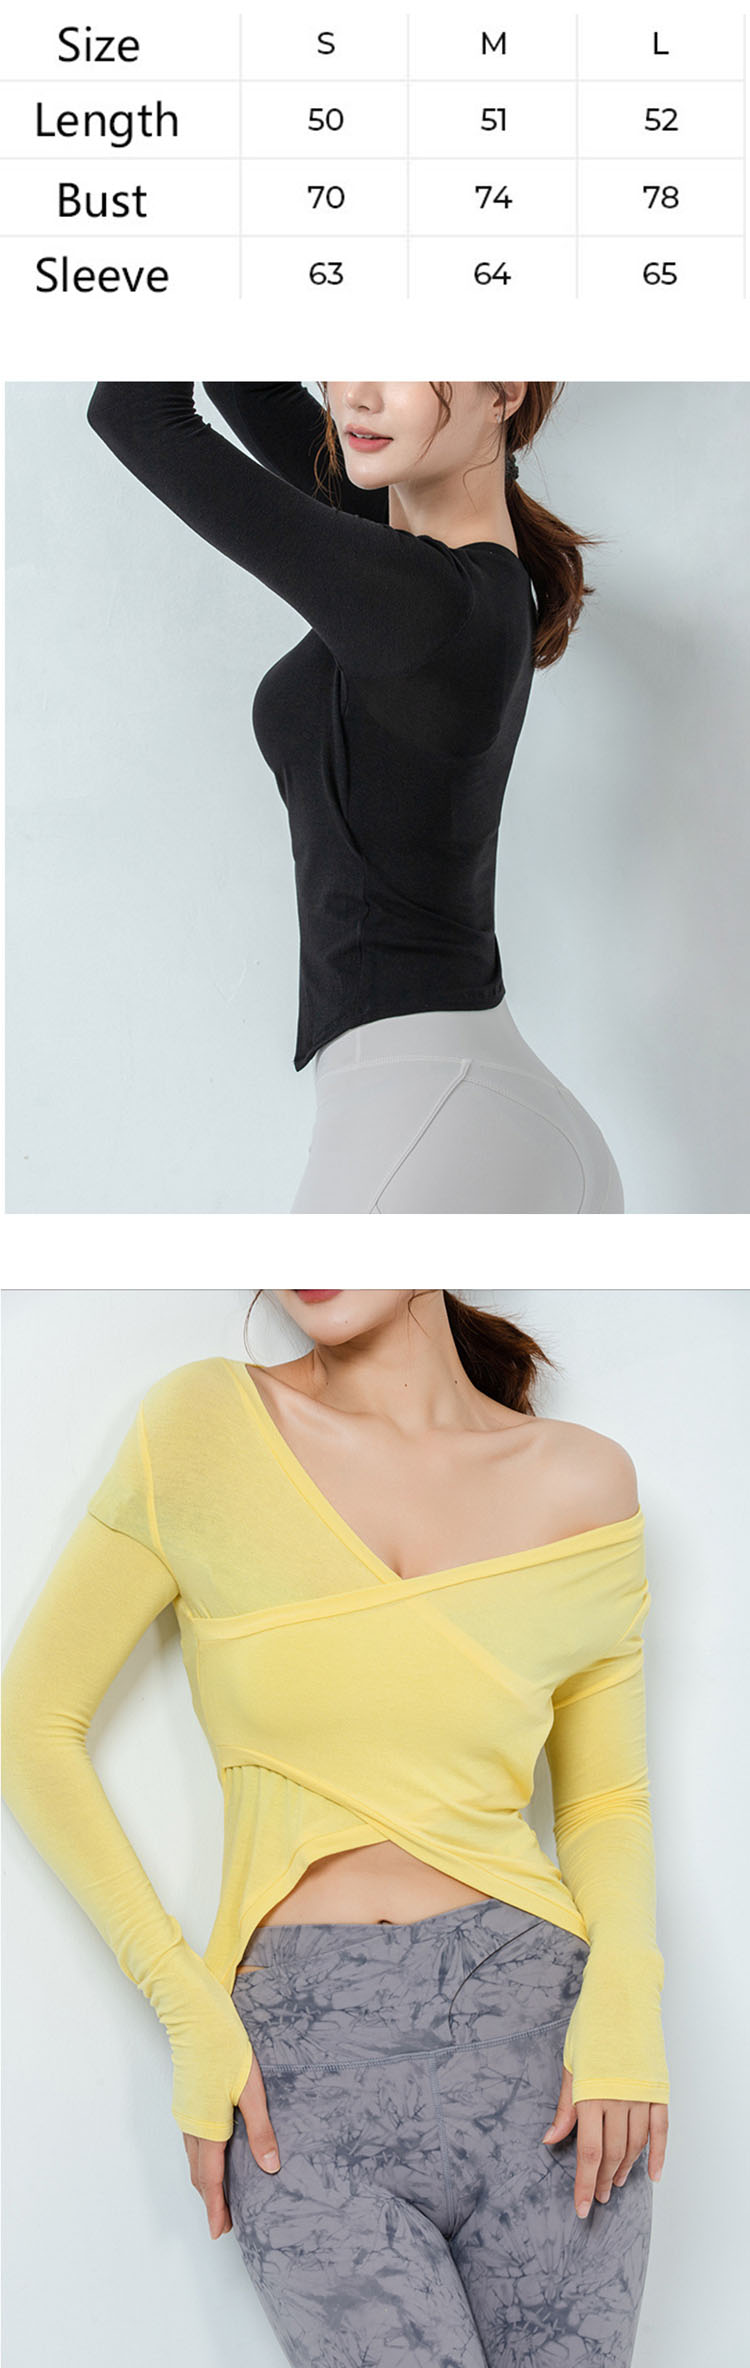 Cross hem design is adopted to show sexy waist and slim